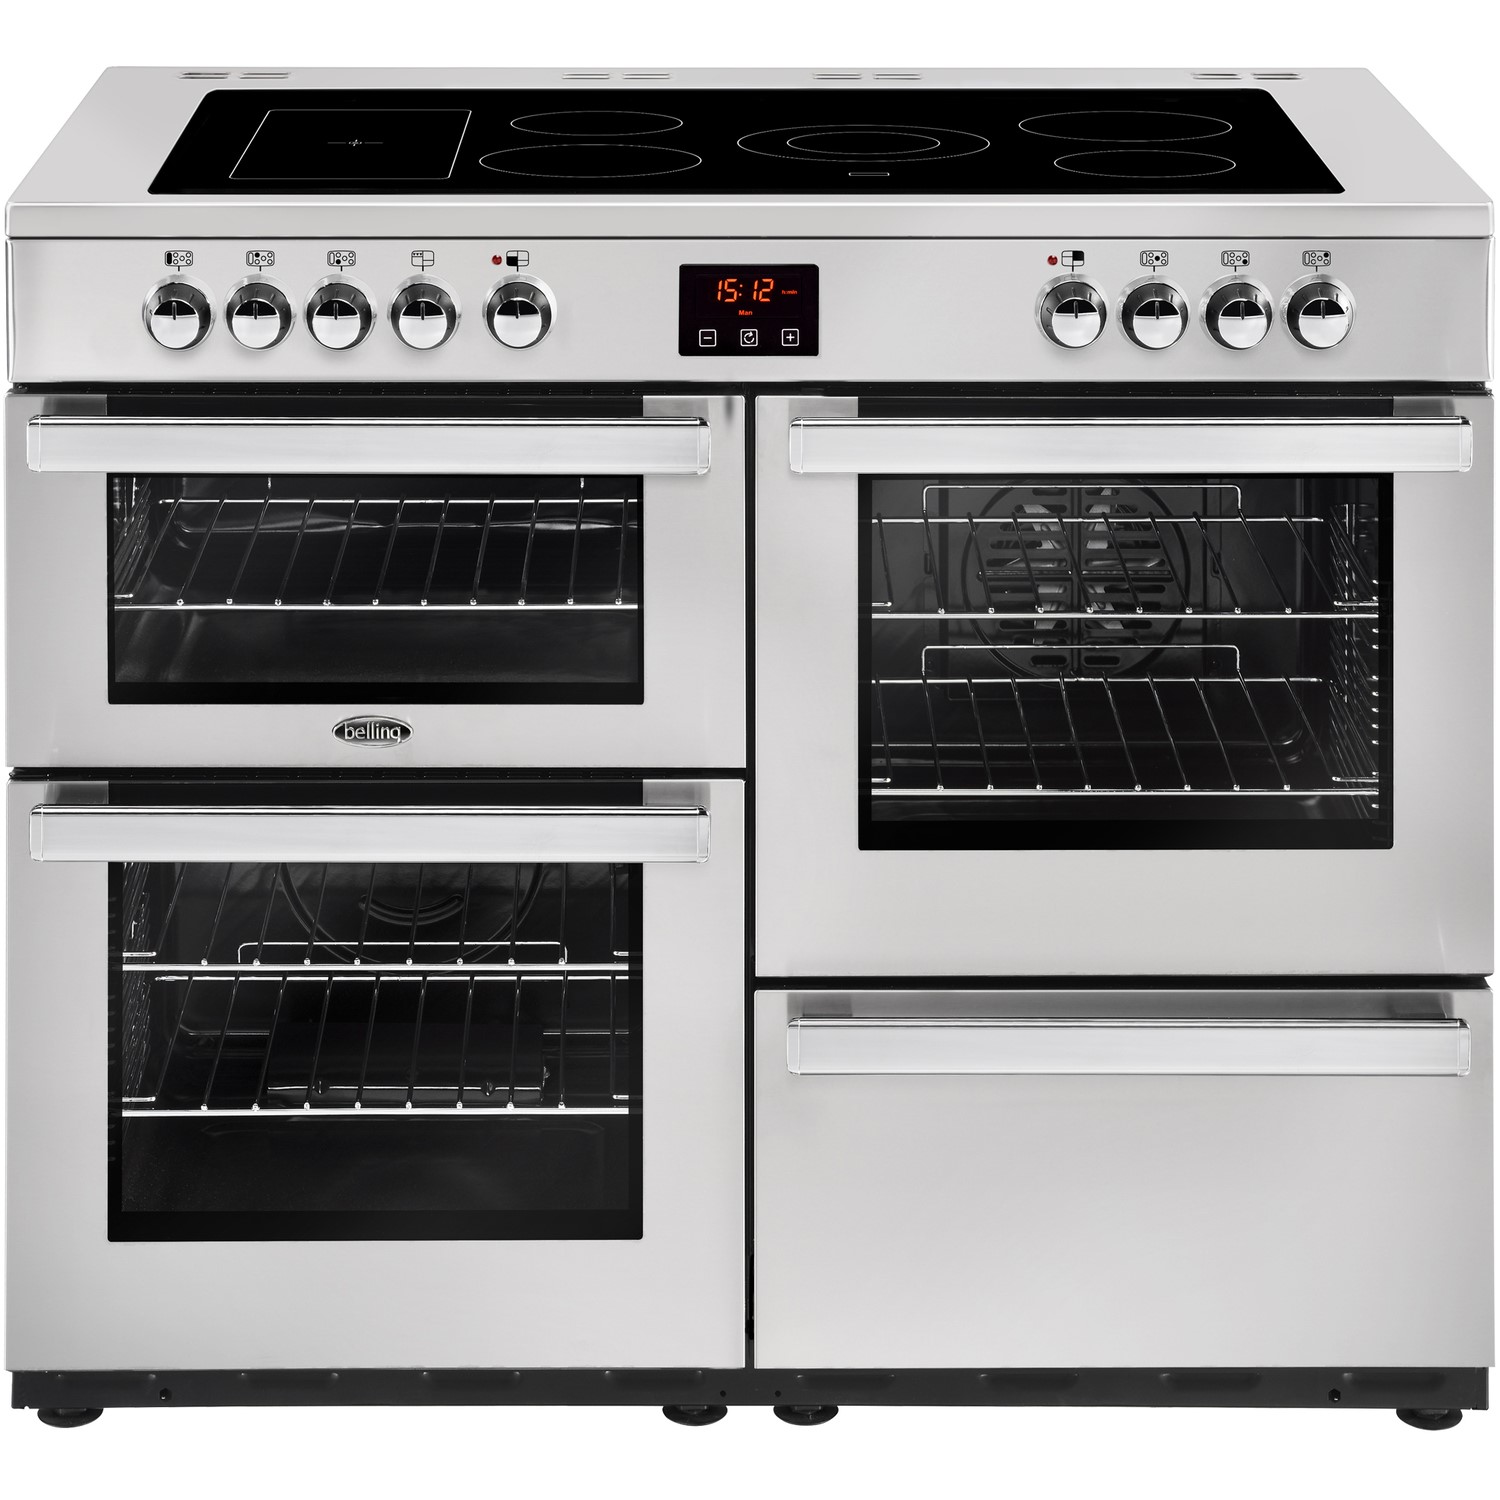 Belling Cookcentre 110E Professional 110cm Electric Range Cooker with Ceramic Hob - Stainless Steel